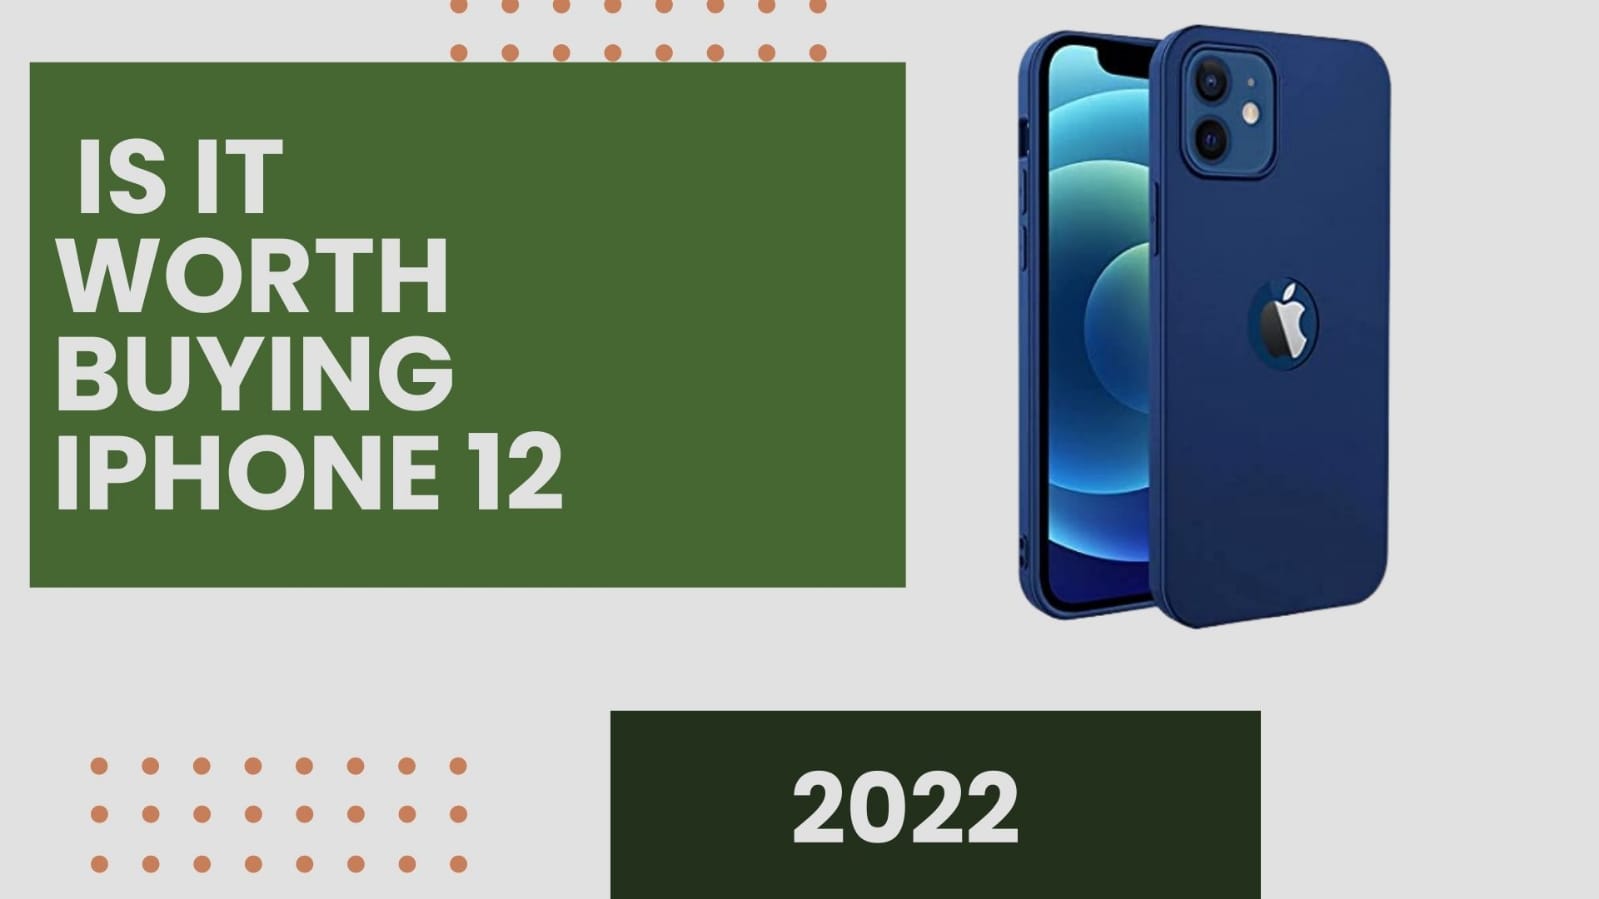 Is it worth buying iPhone 12 in 2022?